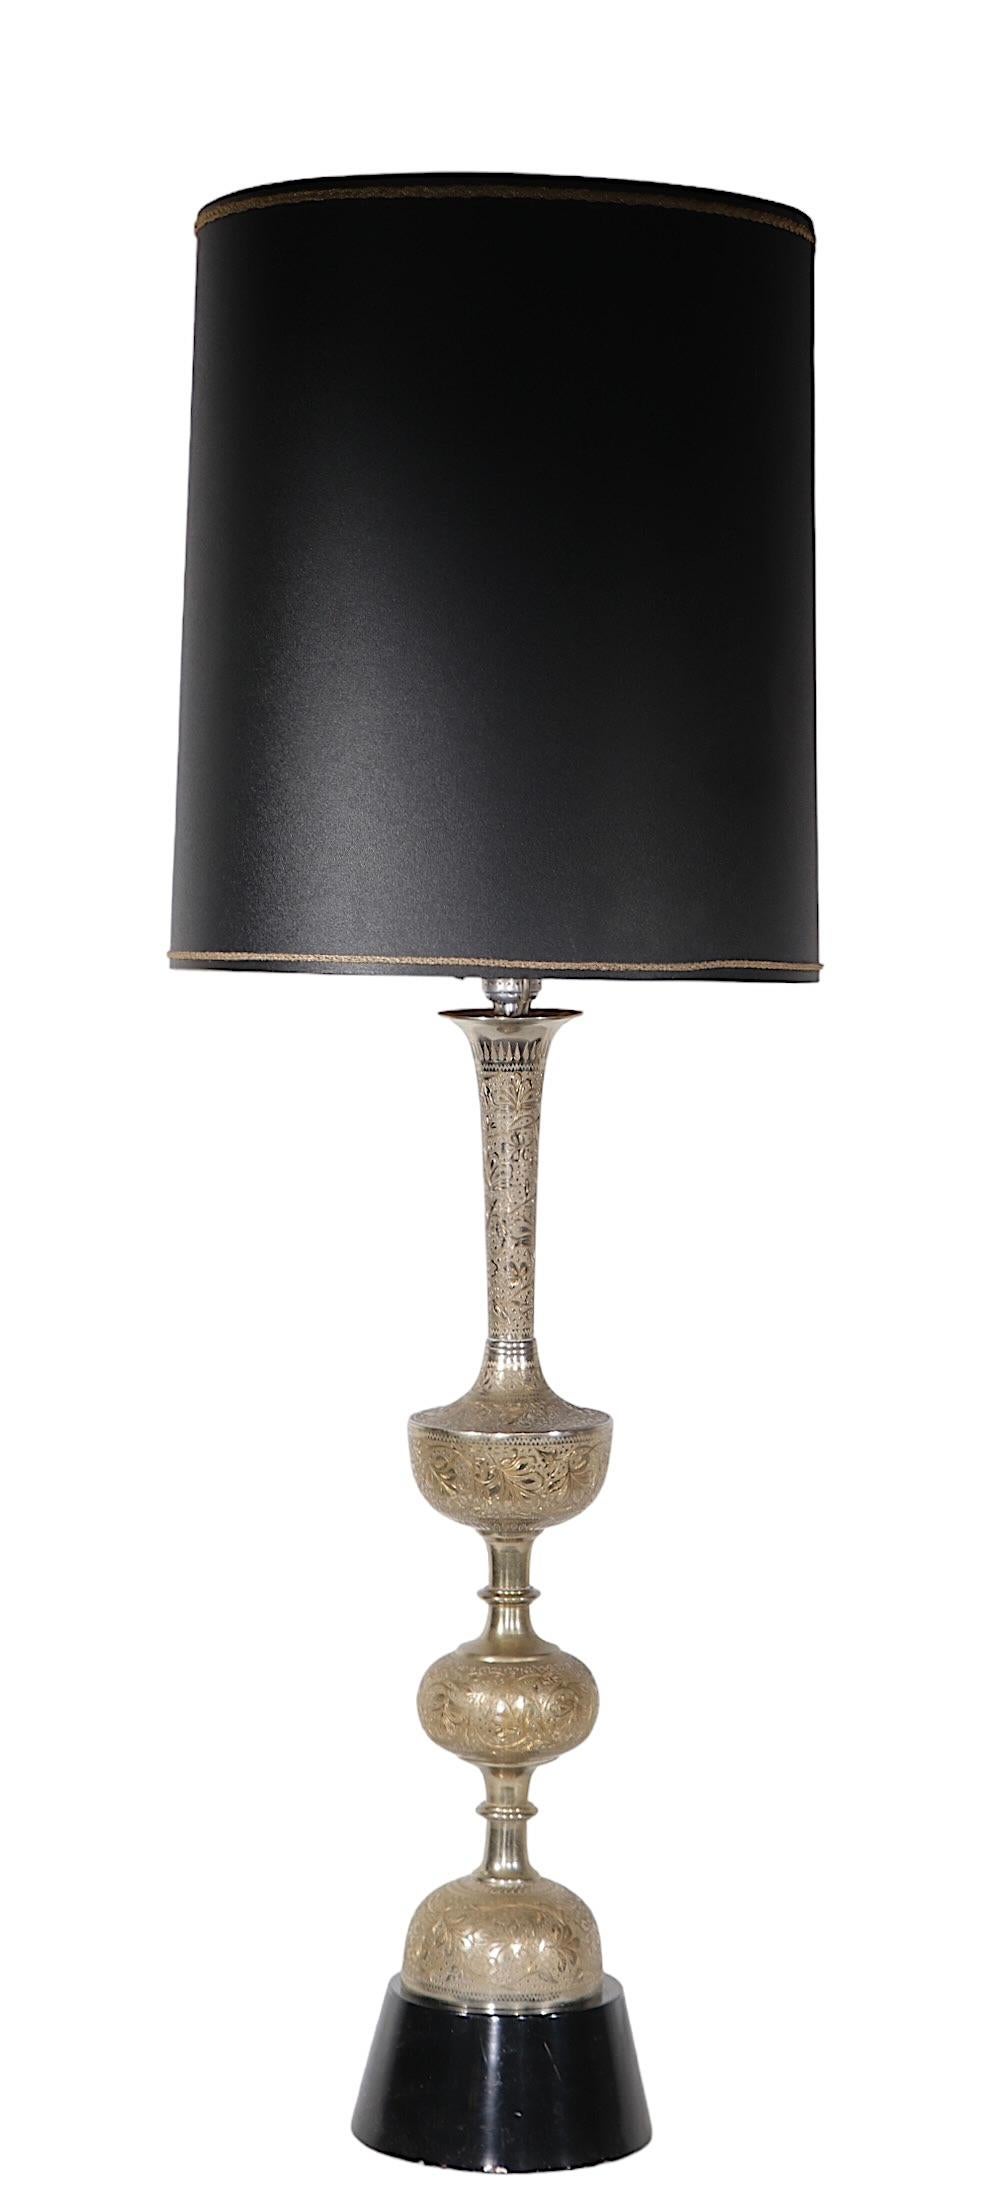  Large Vintage Table Lamp with Chased Silver Finish c. 1970's  For Sale 7